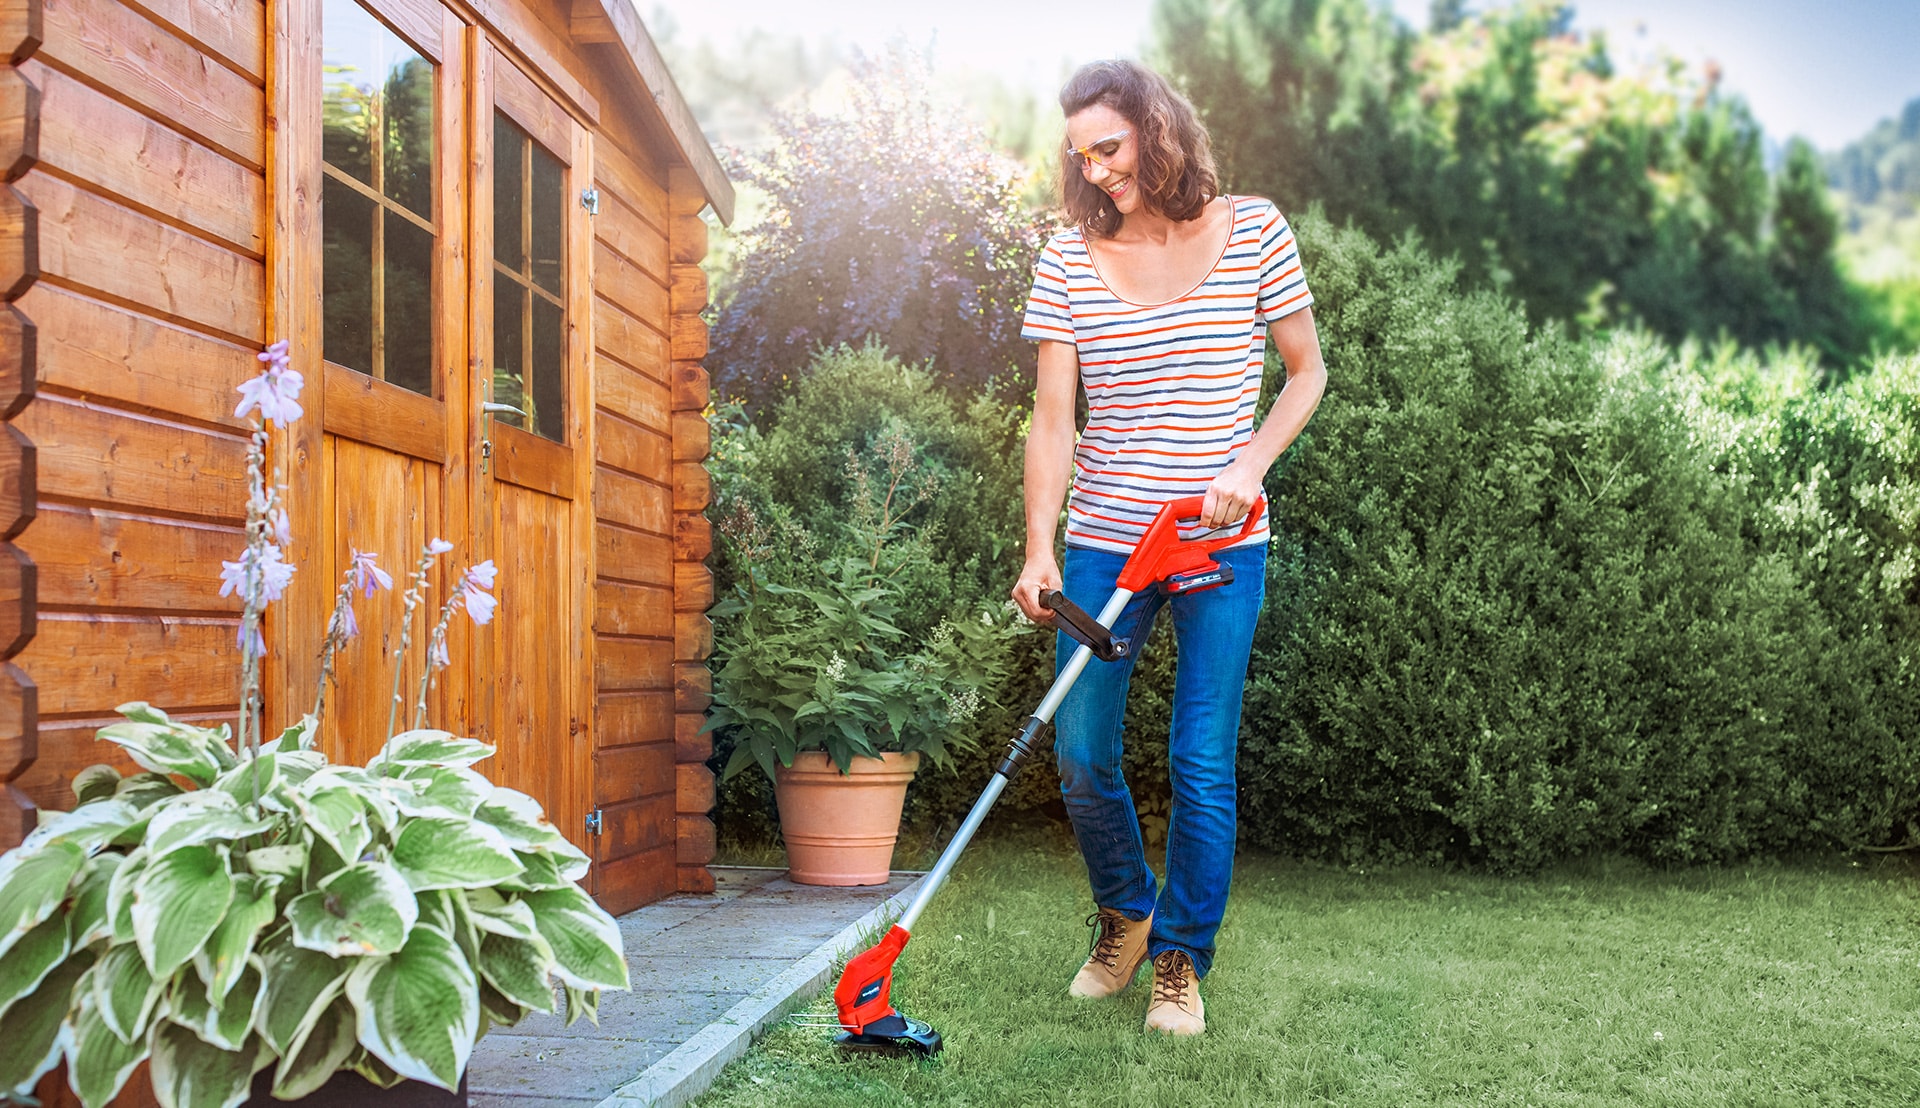 Trimming your lawn: How to use lawn trimmer | Einhell Blog